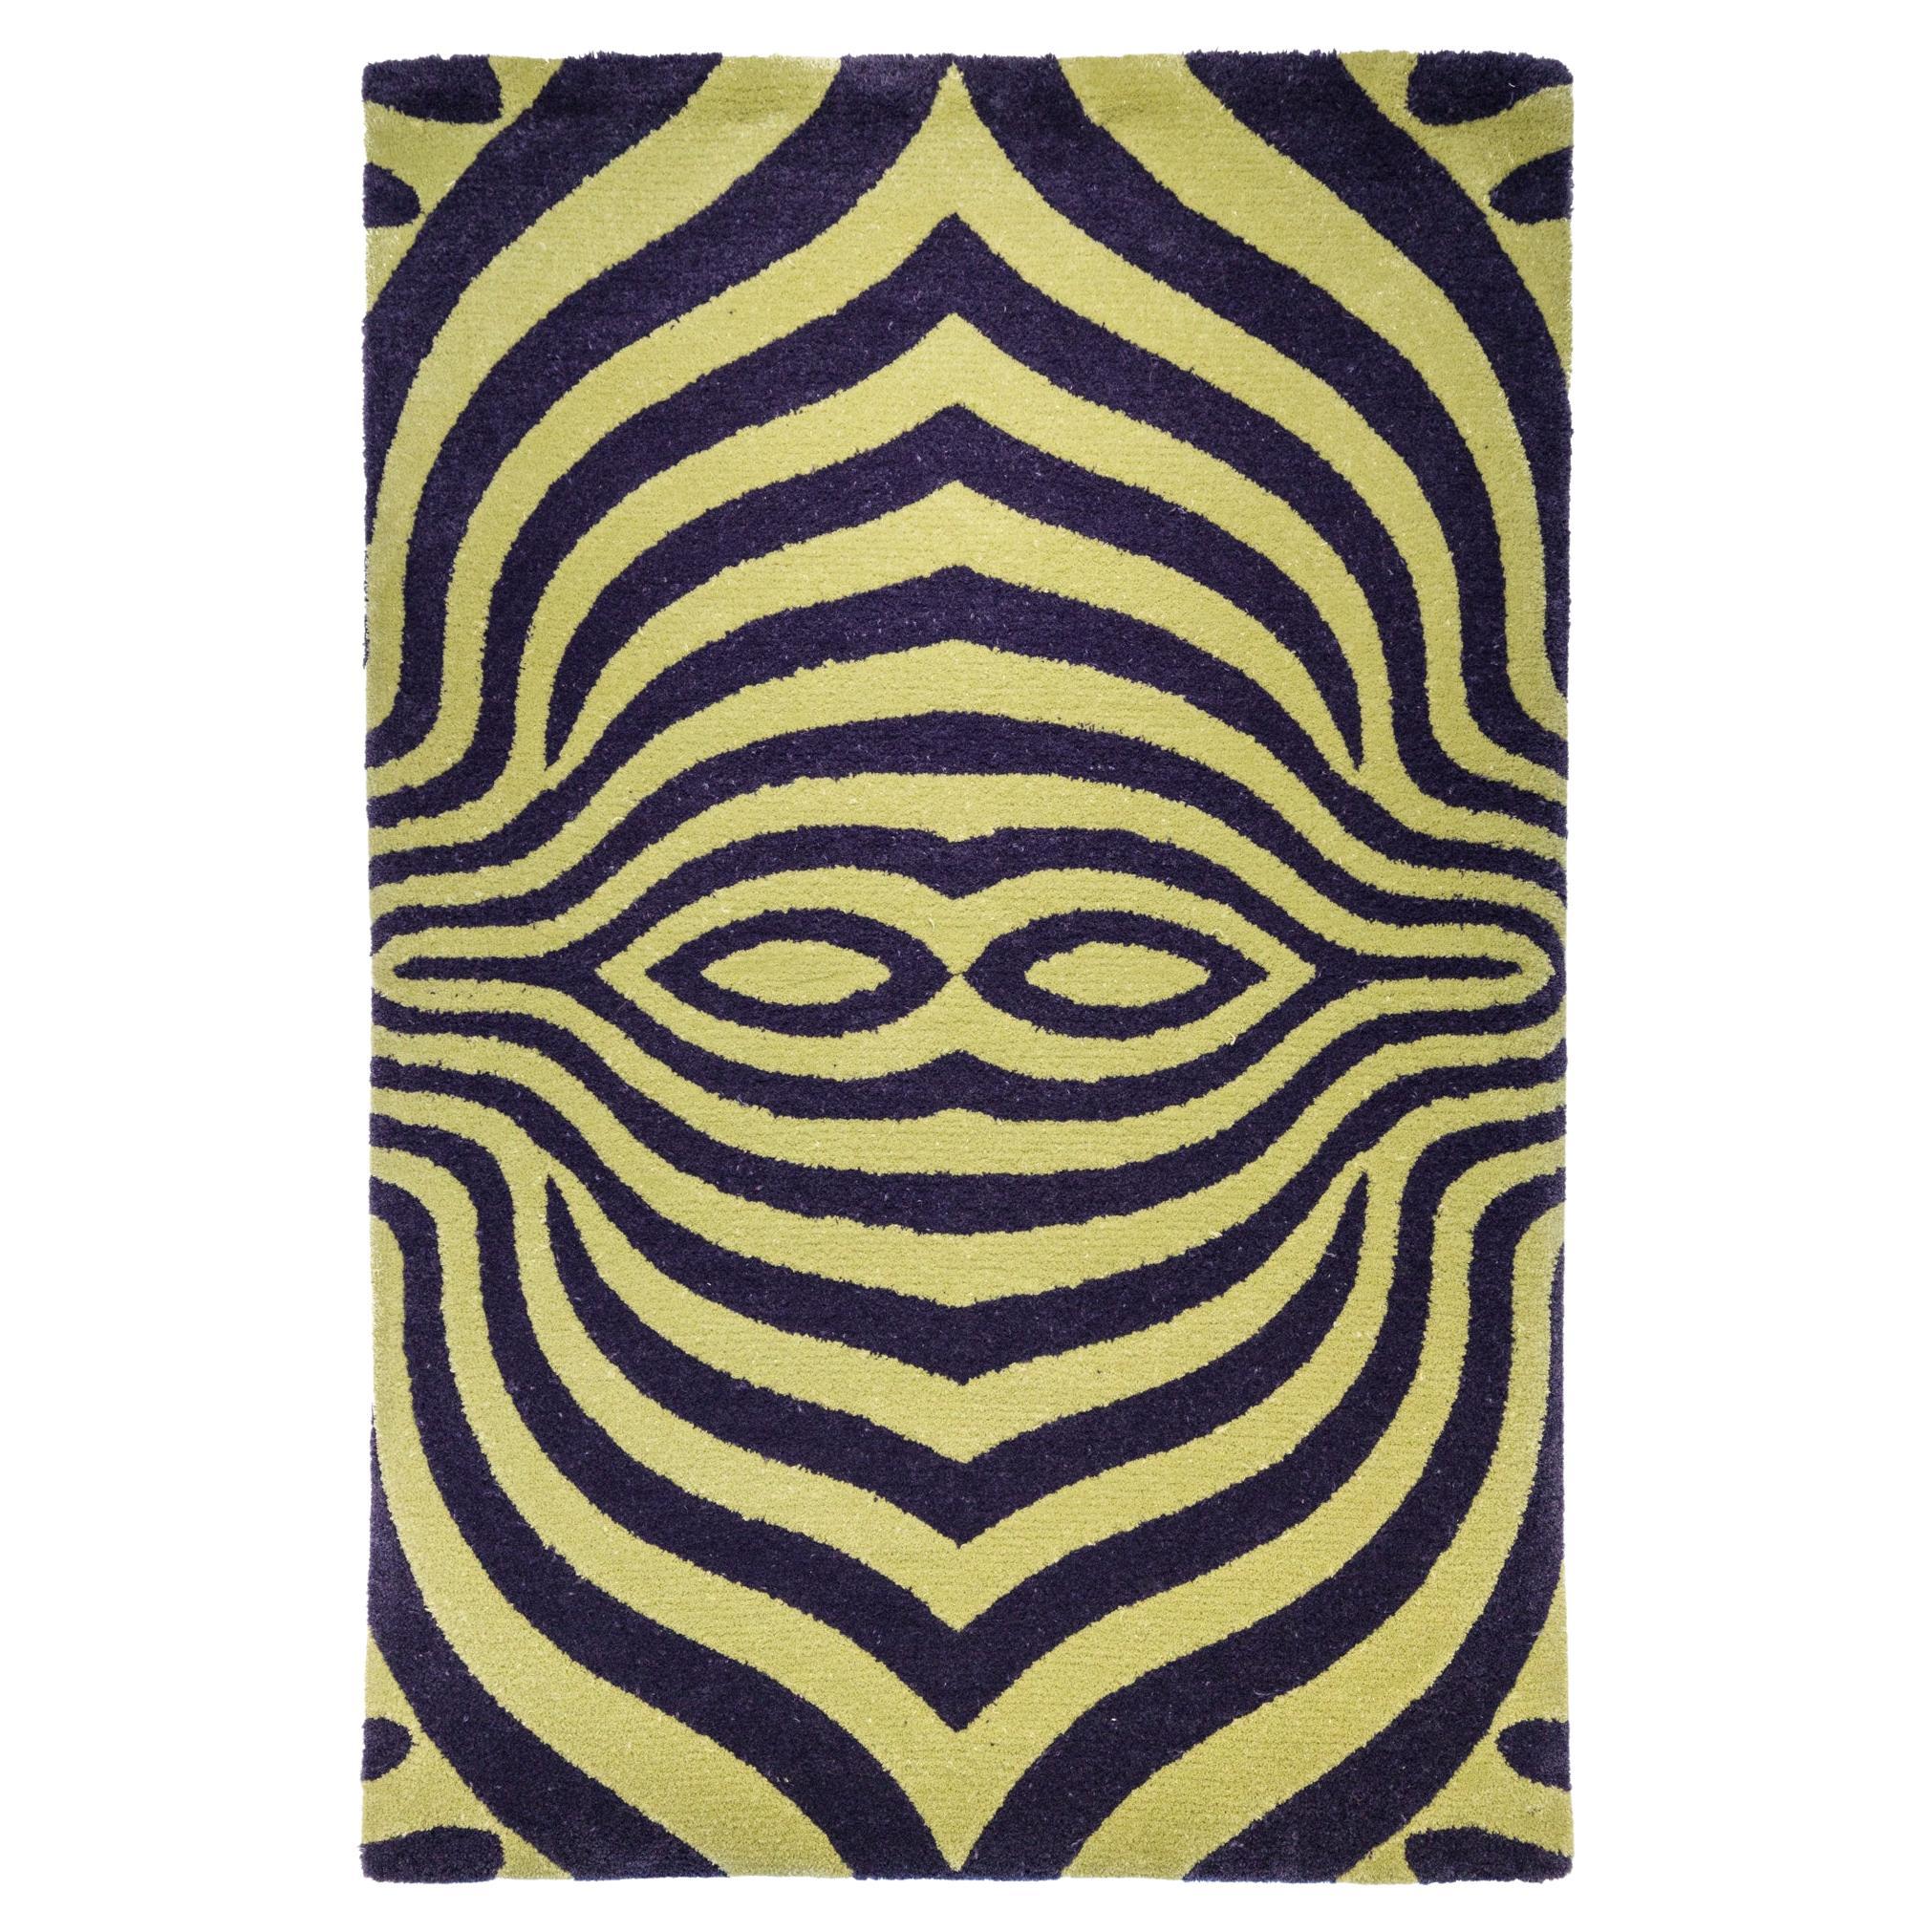 Symmetrical Hanging Tapestry, Tufted New Zealand Wool